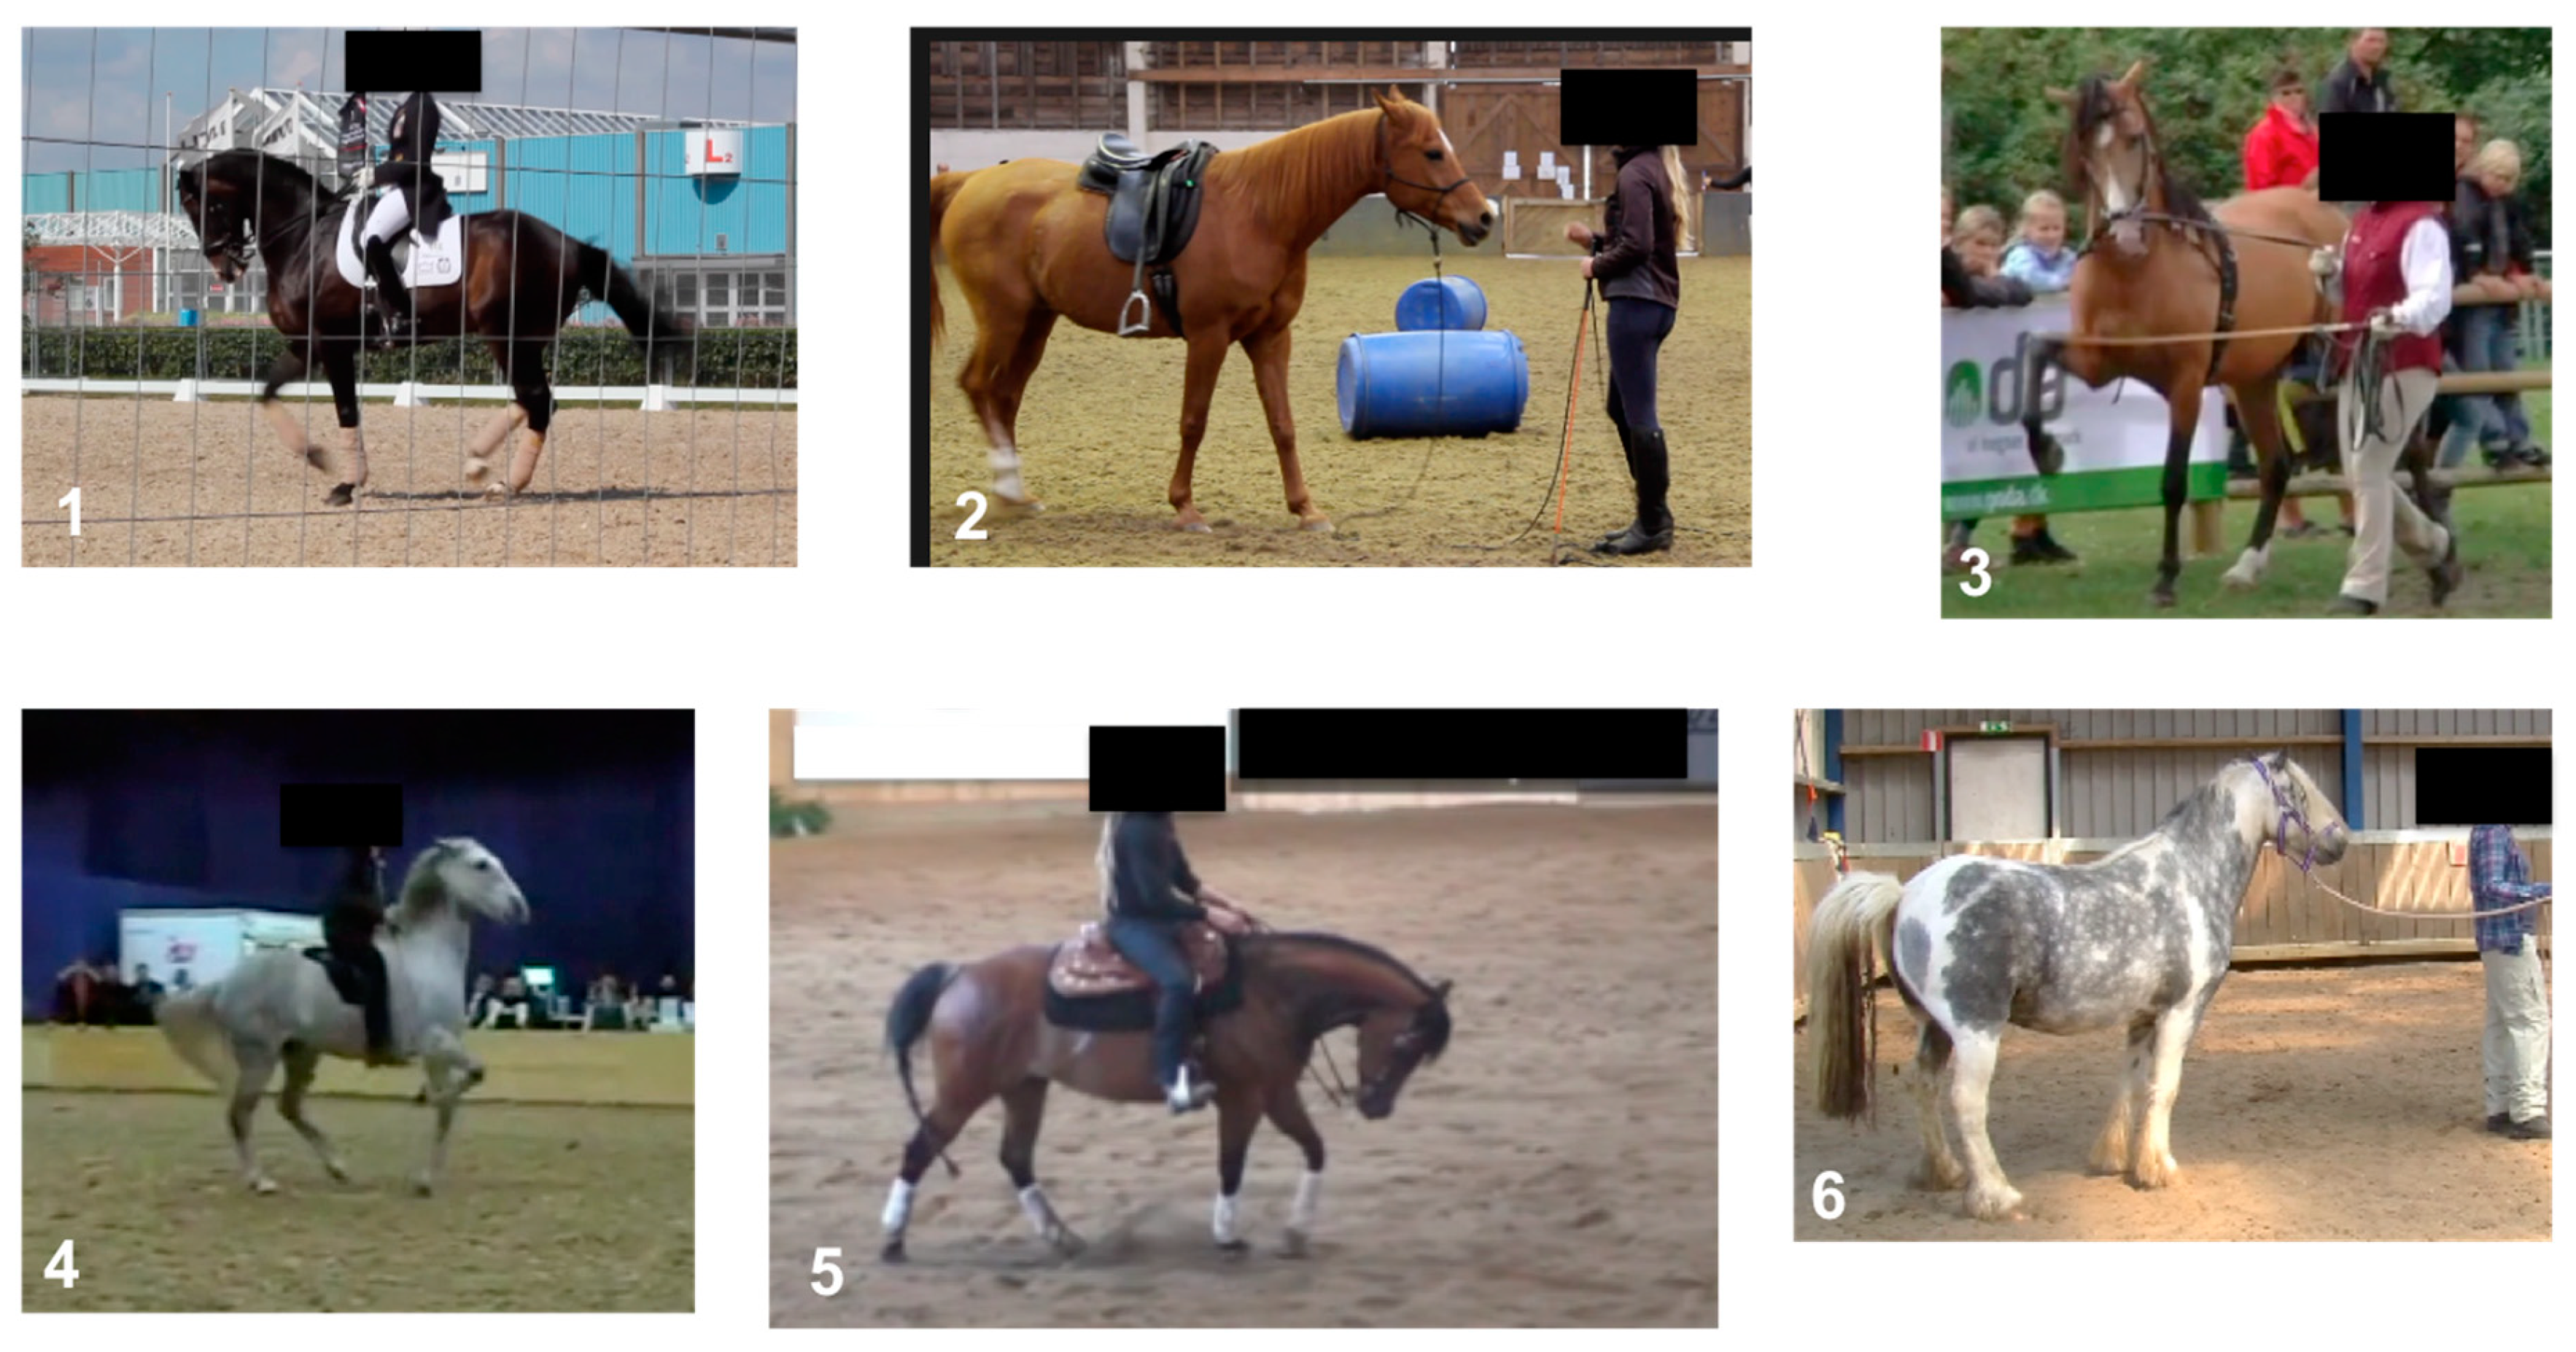 Why do we Measure Horses in Hands? - Top Flight Equestrian